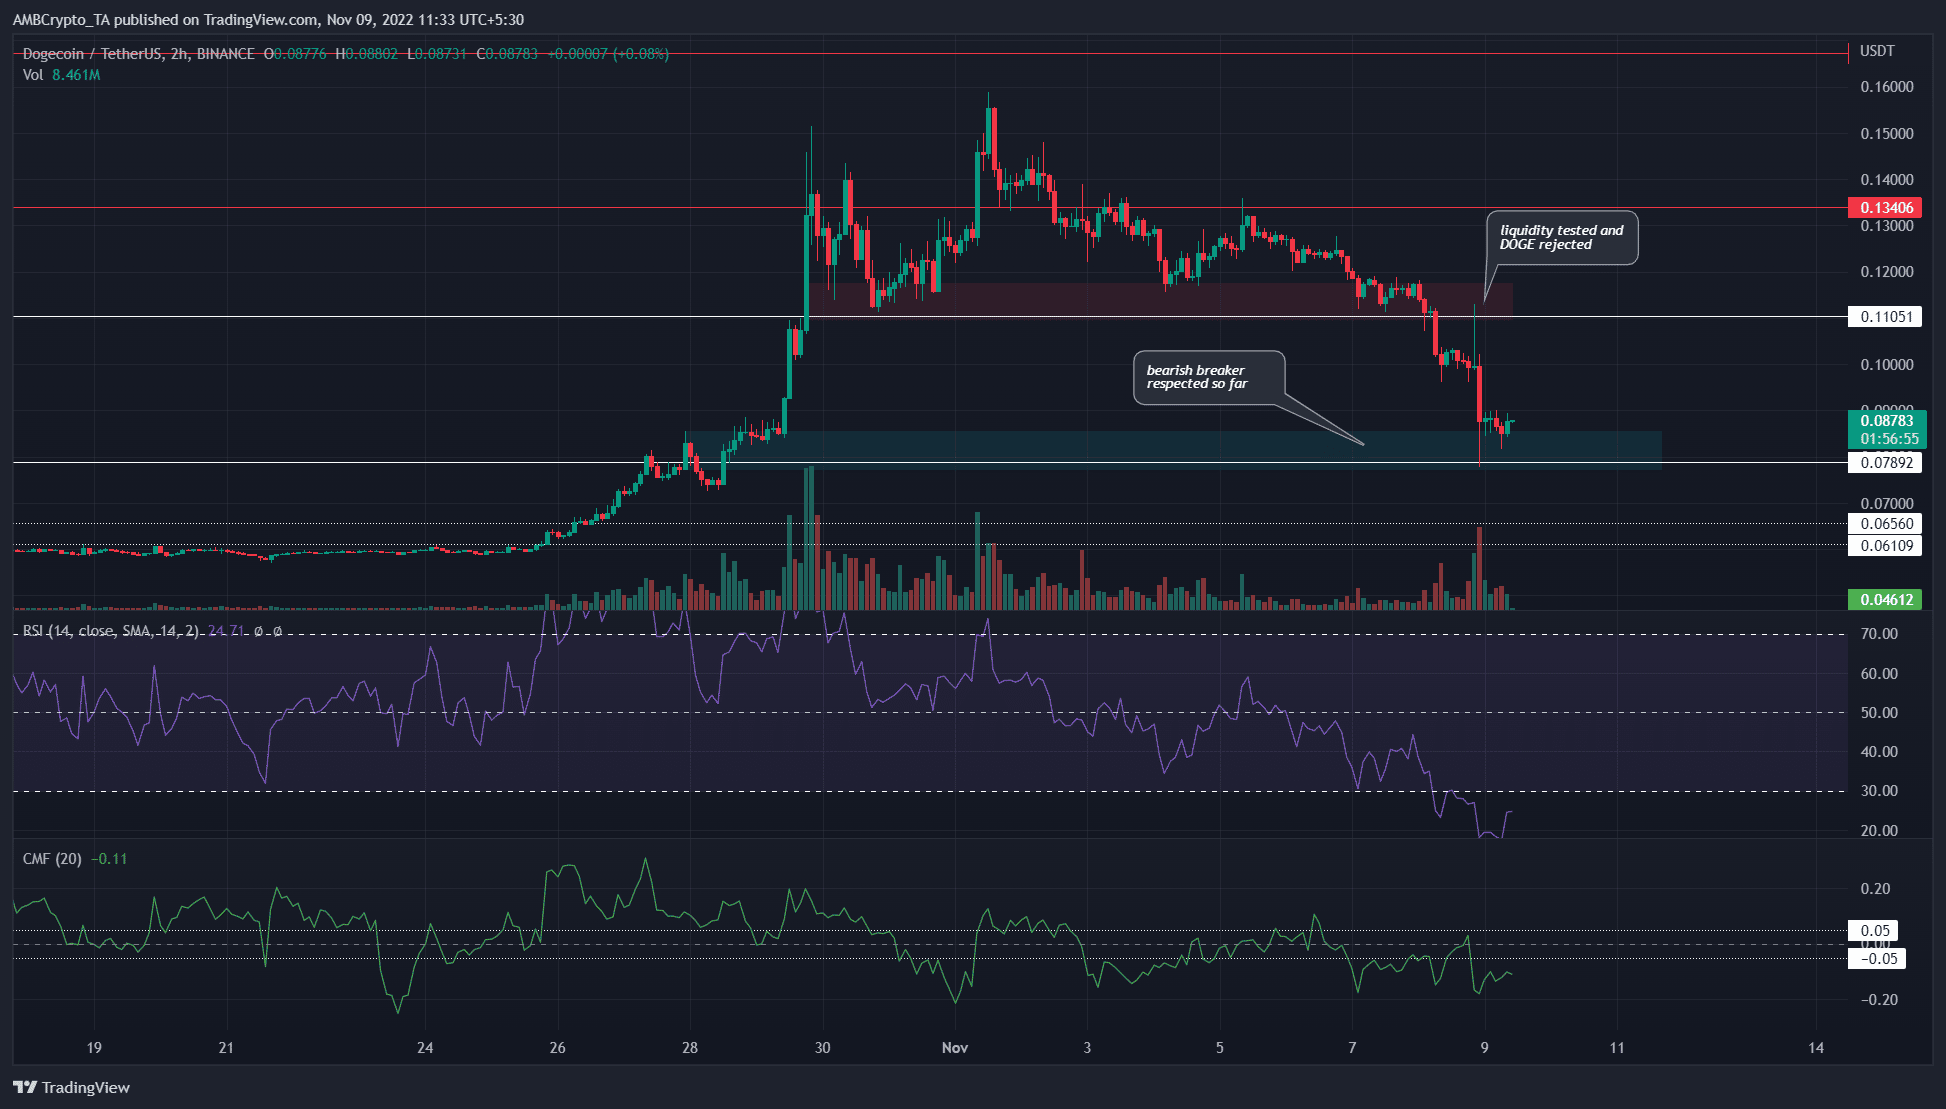 Dogecoin enters a zone of support but buying here could be a risky venture